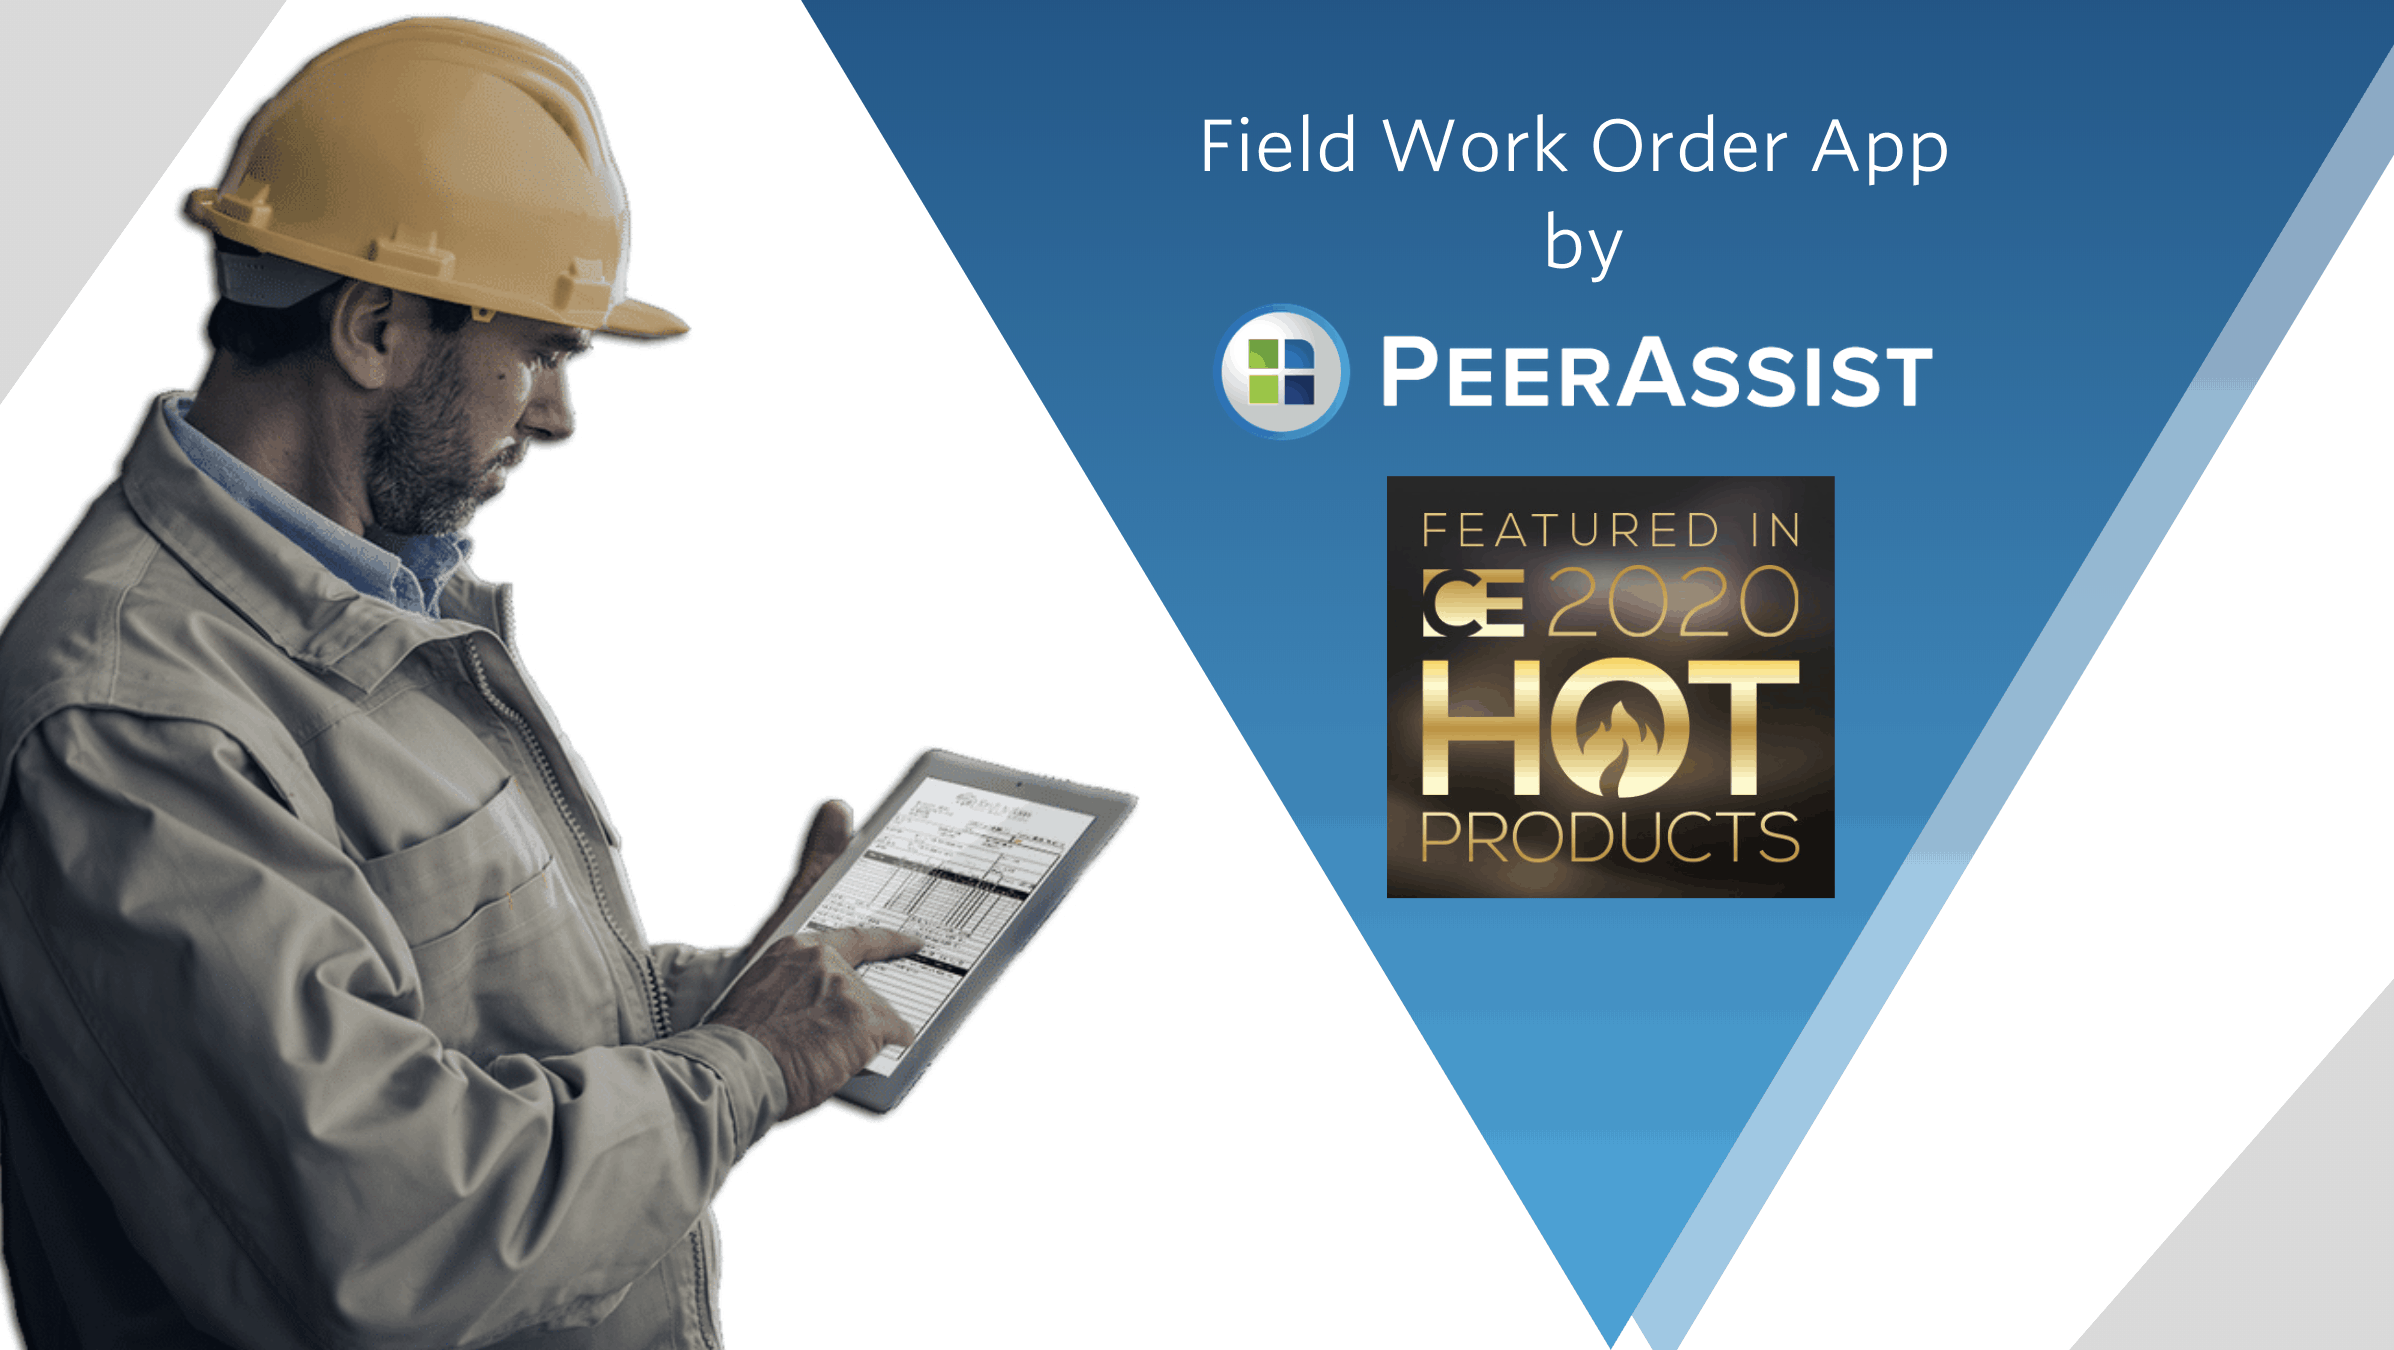 PeerAssist featured in Construction Executive 2020 Hot Products.